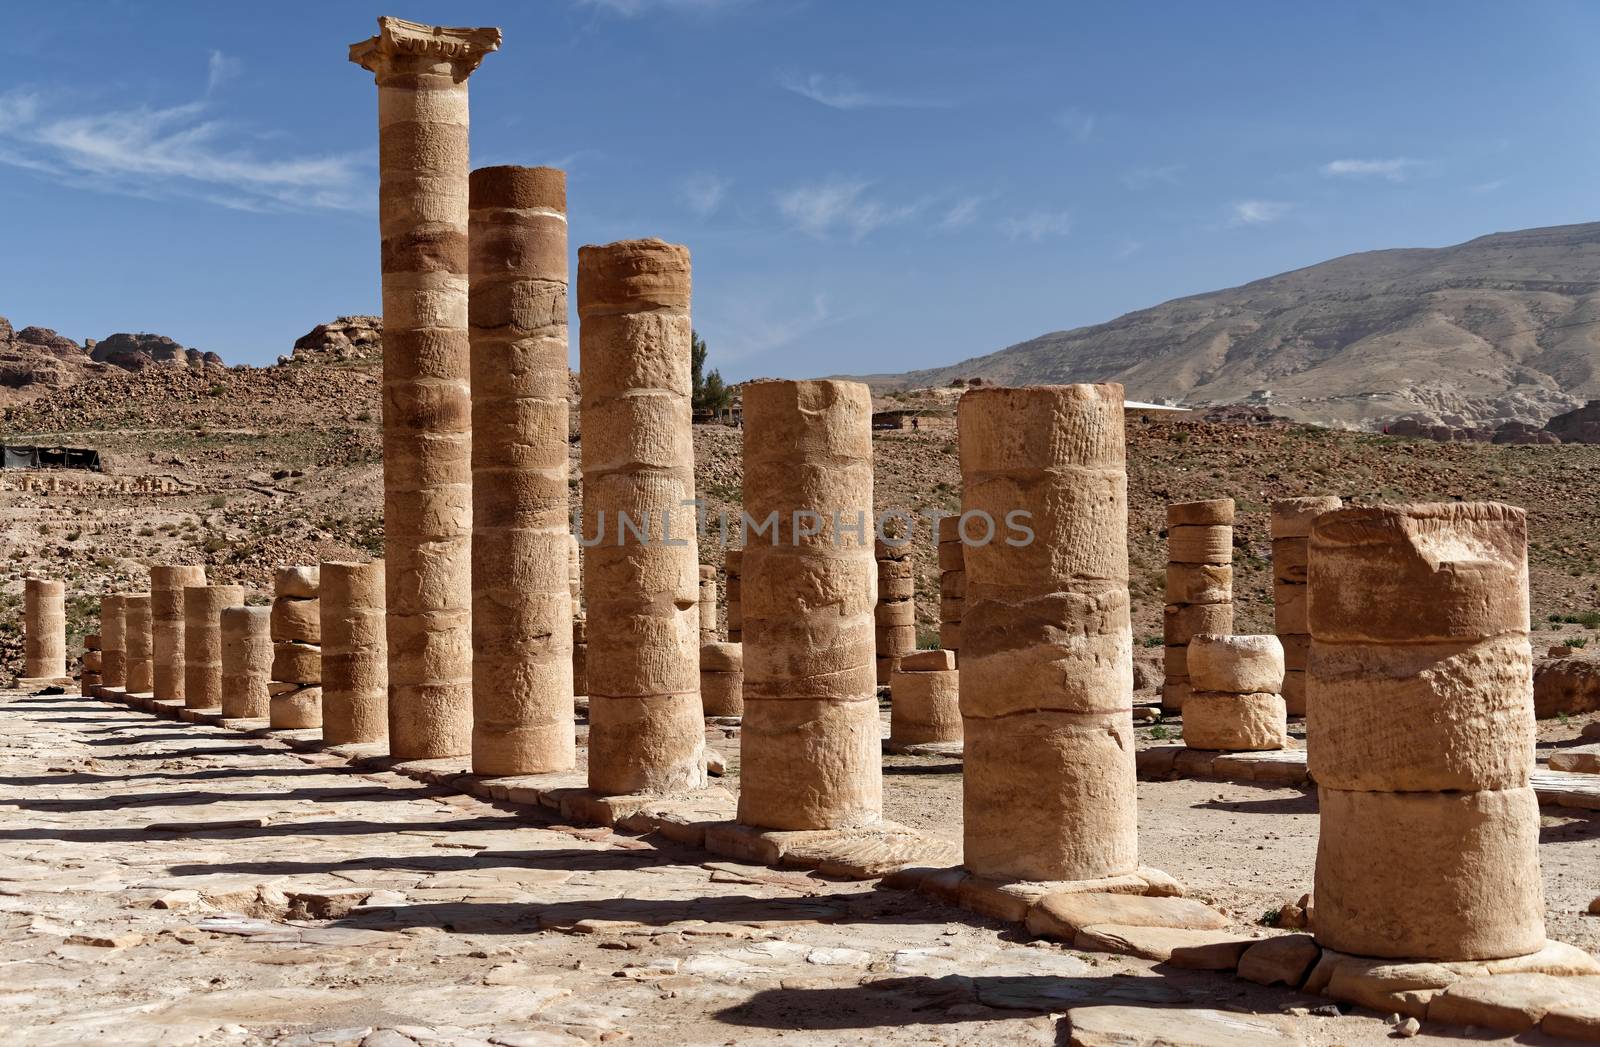 Pillars of the Romans in the Necropolis of Petra, Jordan by geogif